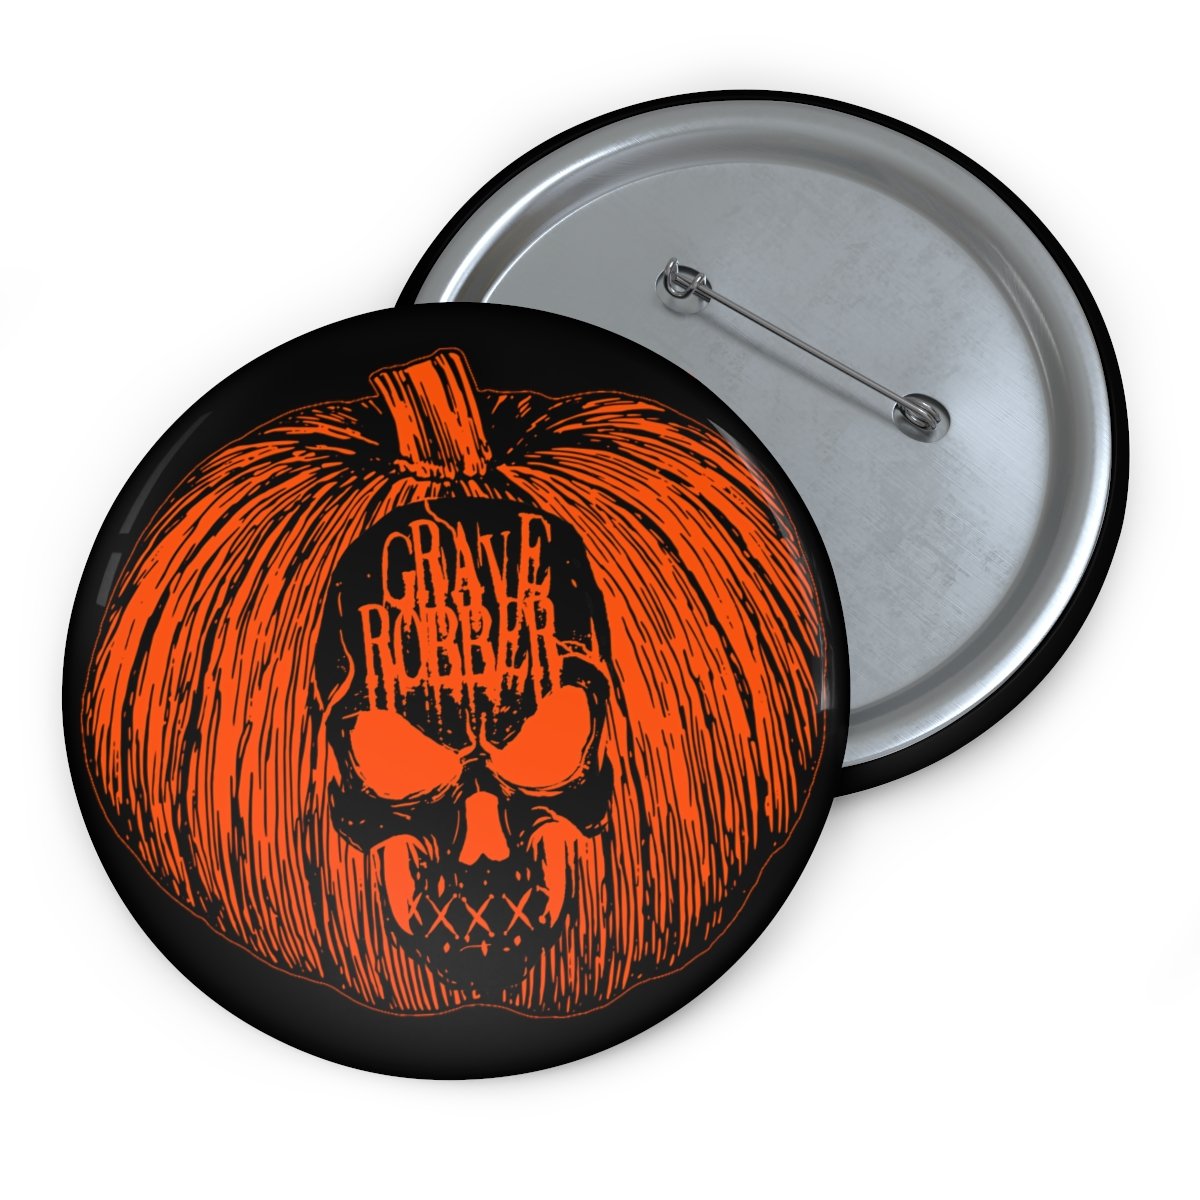 Grave Robber Pumpkin Limited Edition Pin Buttons